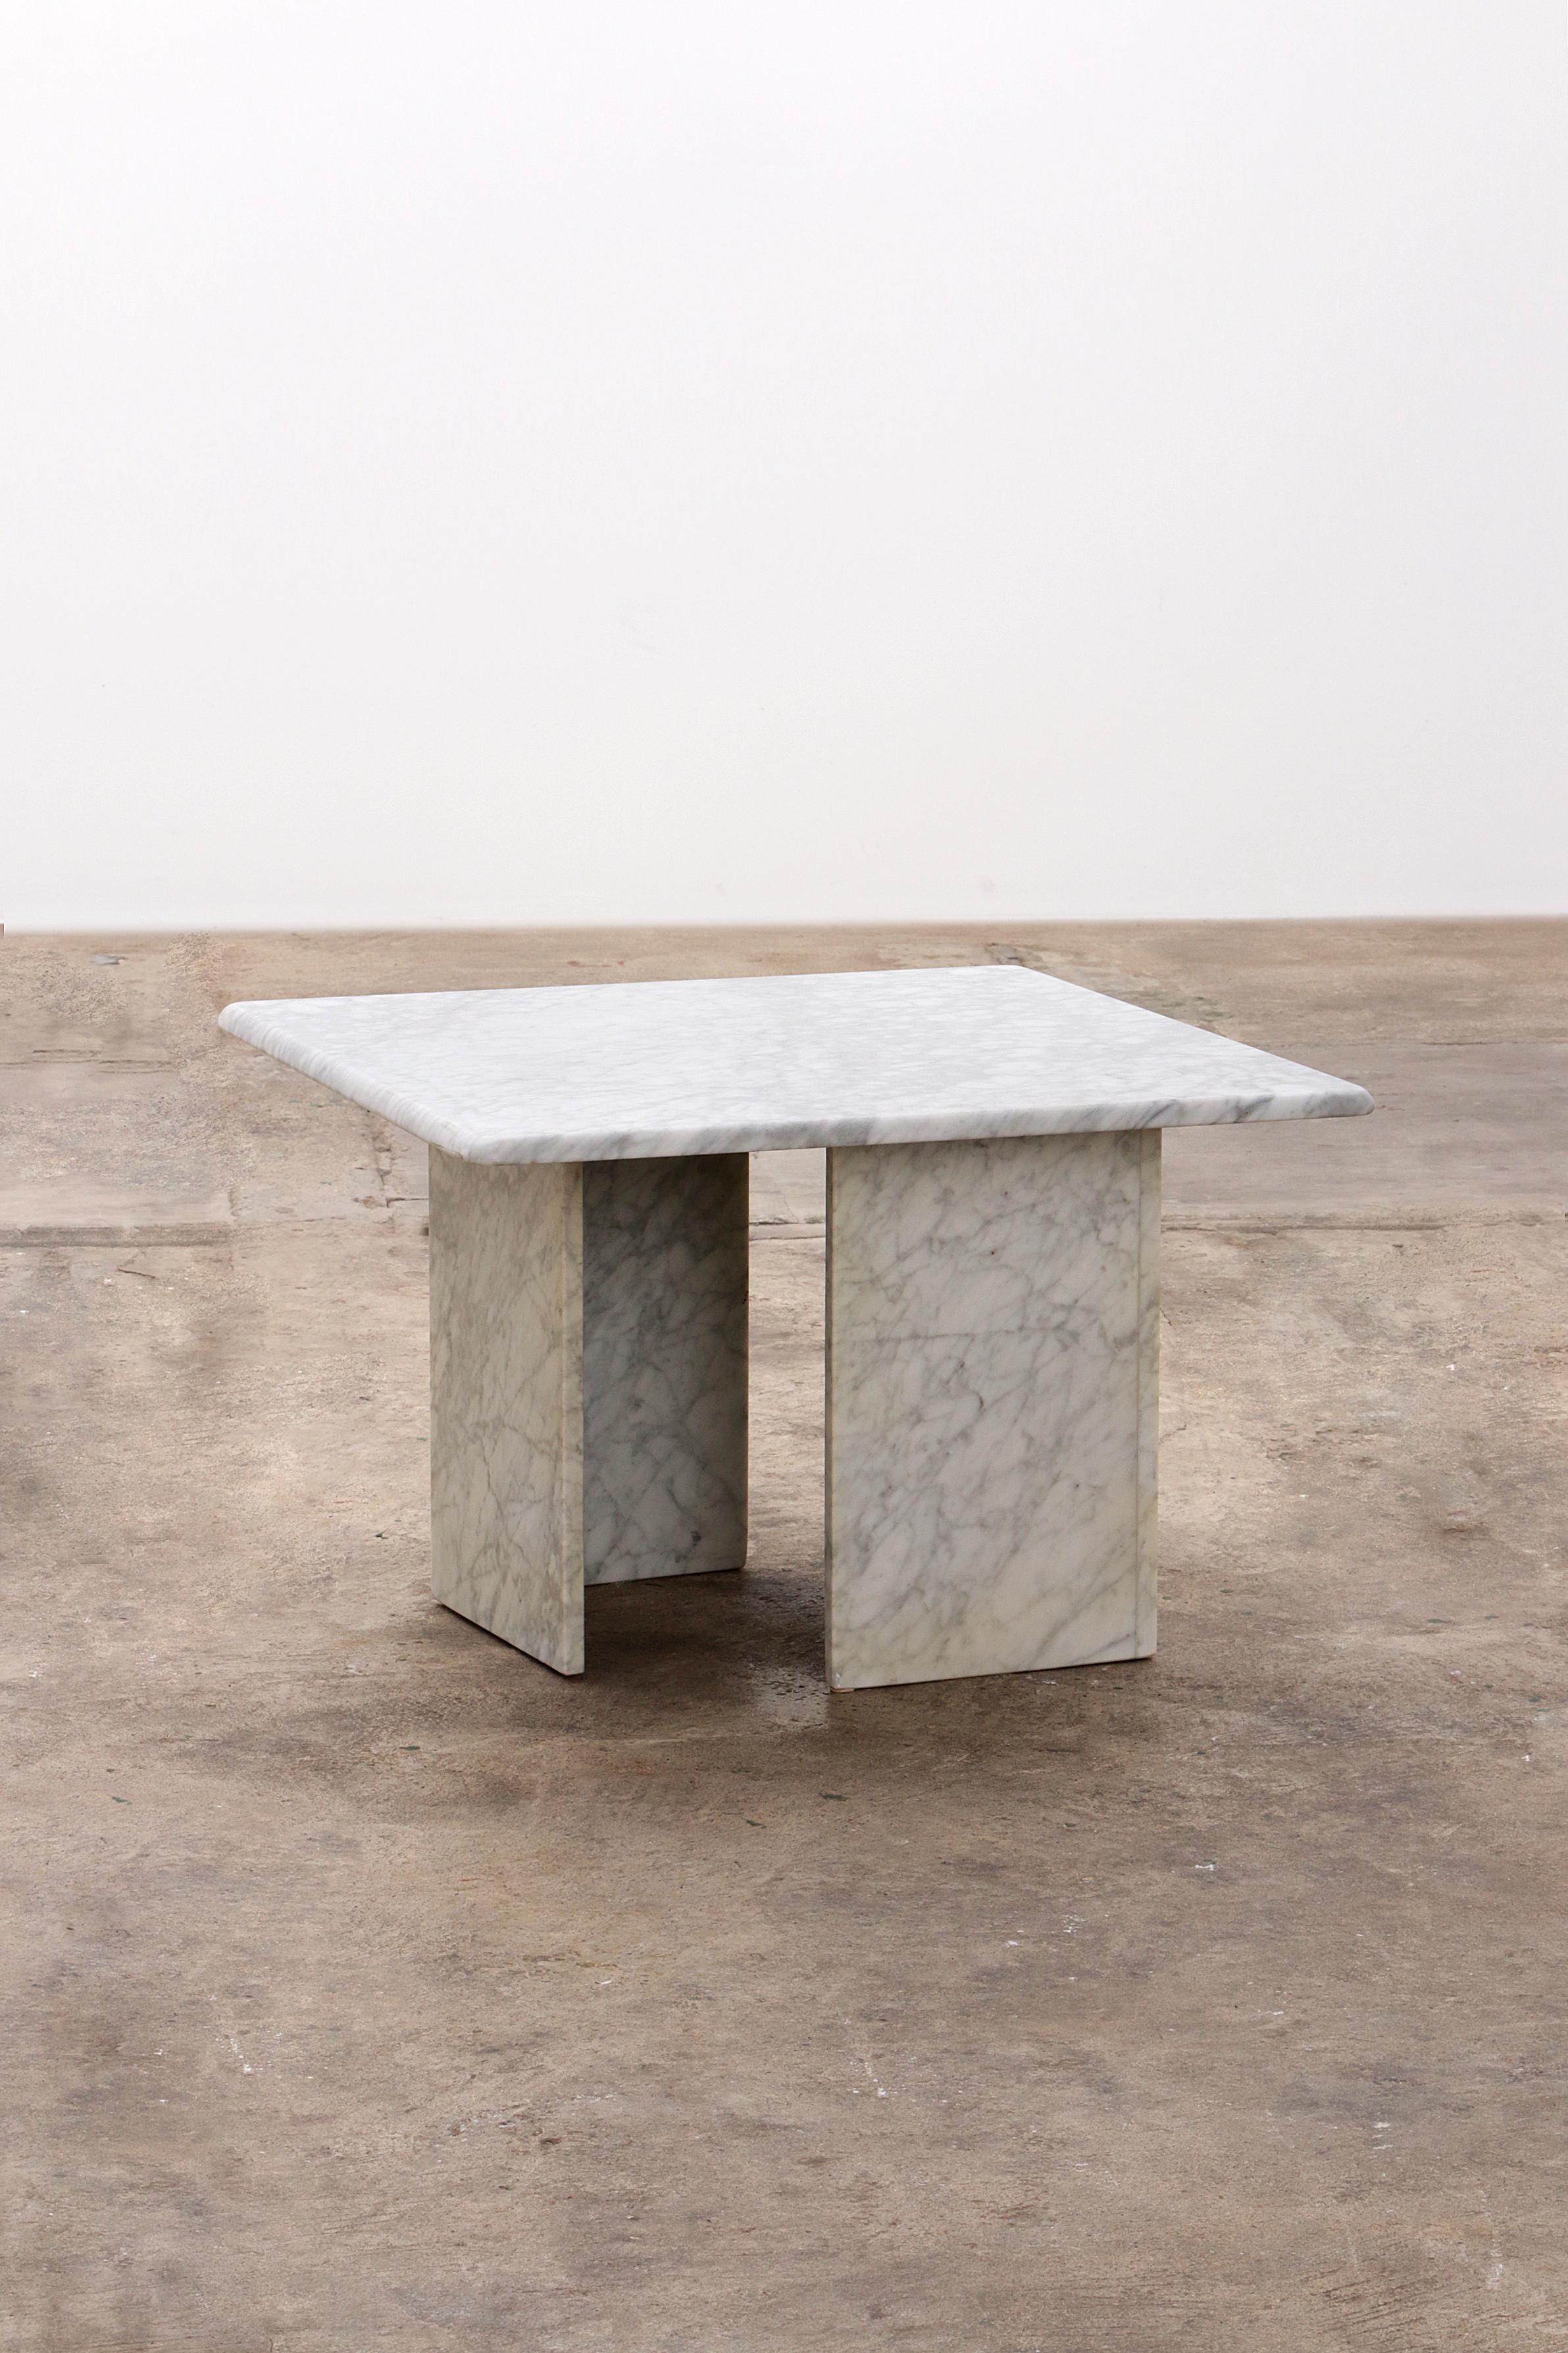 Italian Marble coffee table, timeless design from the 1970s

Discover the charm of Italian design with our timeless white marble coffee table, a stylish addition to any interior. This coffee table, from the 1970s, effortlessly combines historical